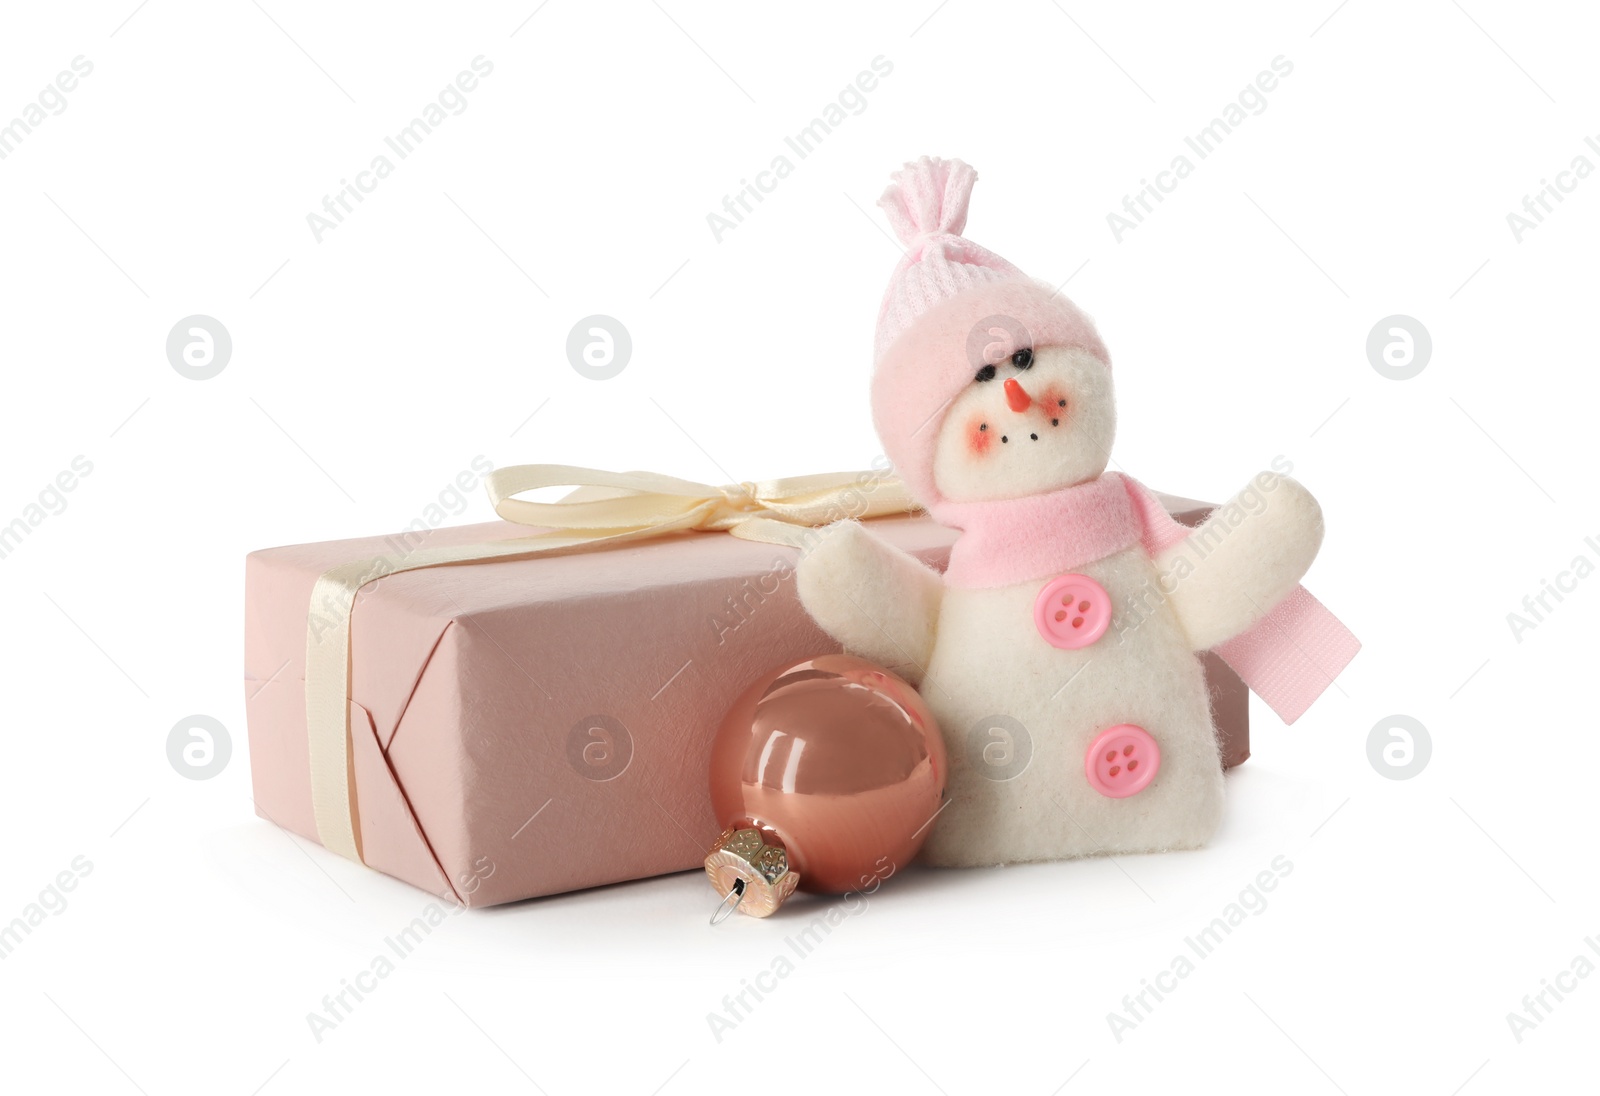 Photo of Cute snowman and Christmas decoration on white background